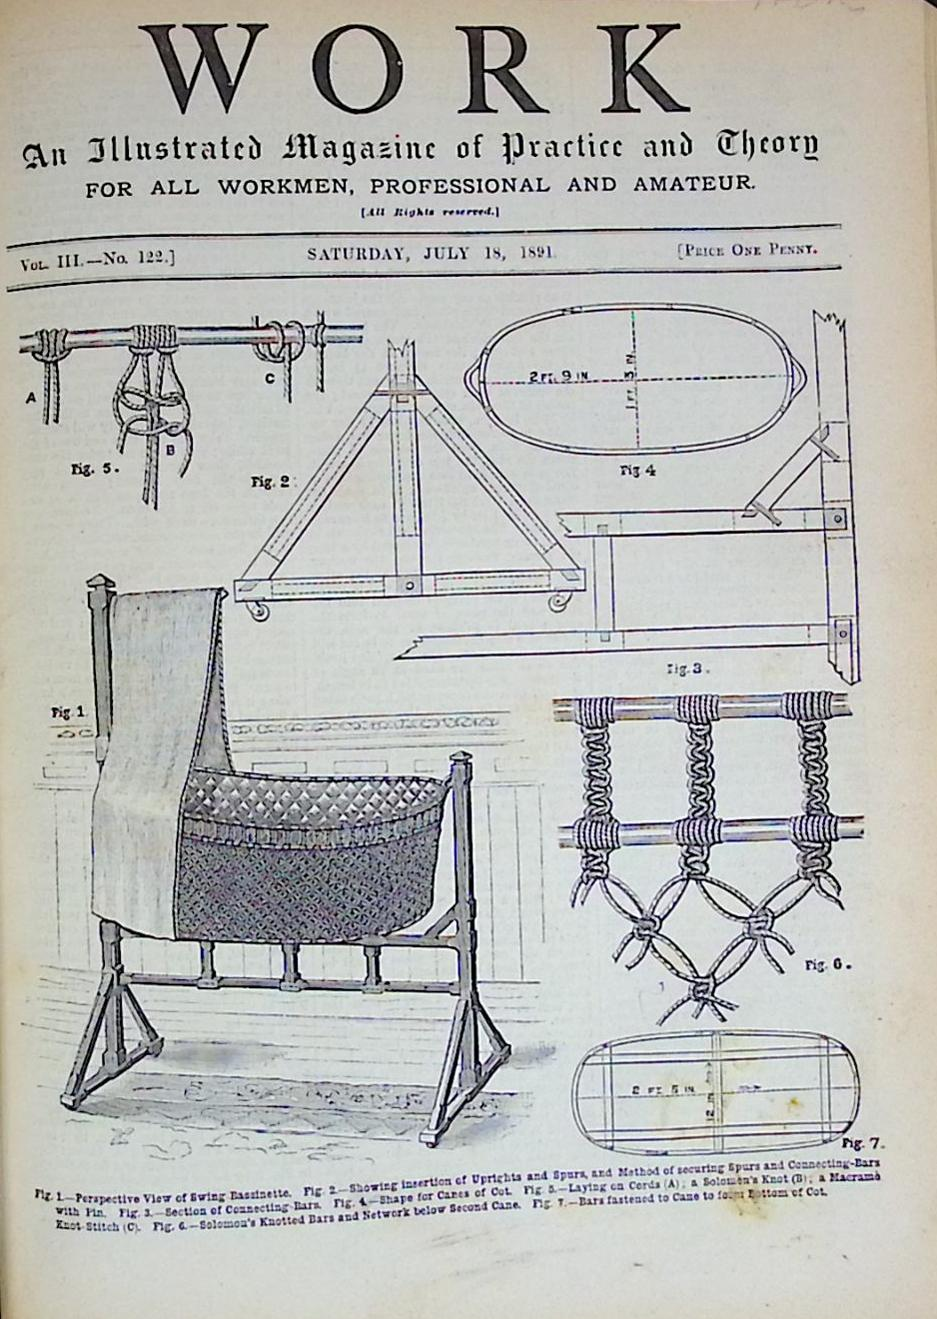 Work. An Illustrated Magazine of Practice and Theory for All Workmen, Professional and Amateur. Volume III. March to September 1891.